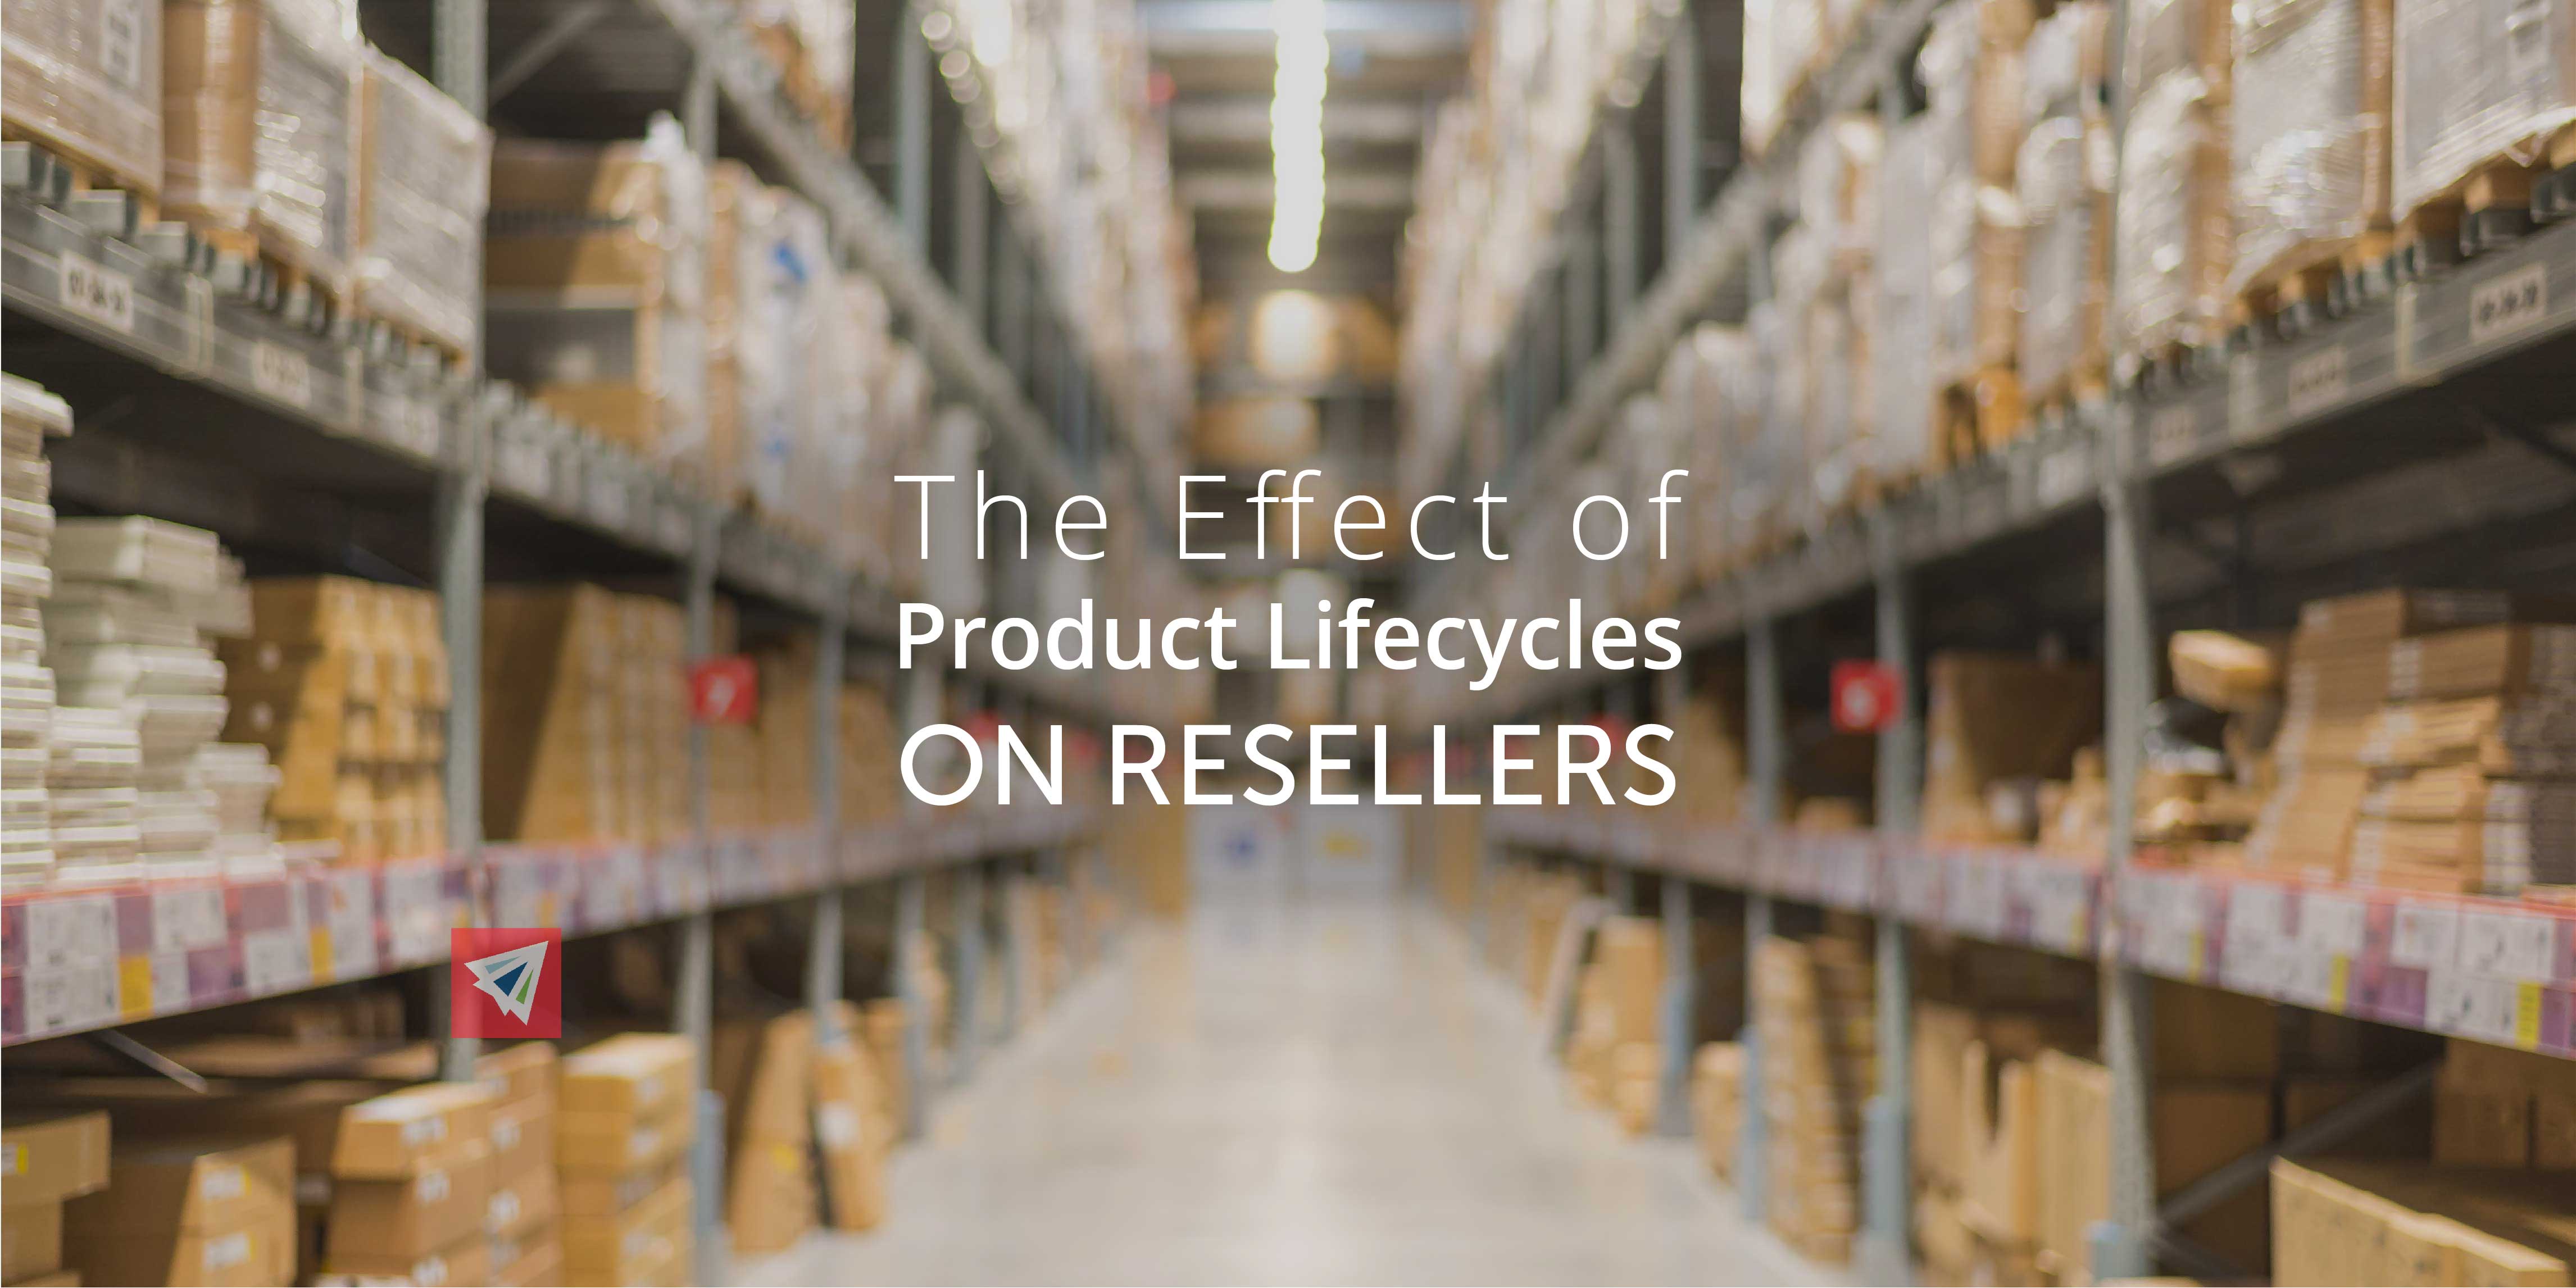 The Effect of Product Lifecycles on Resellers